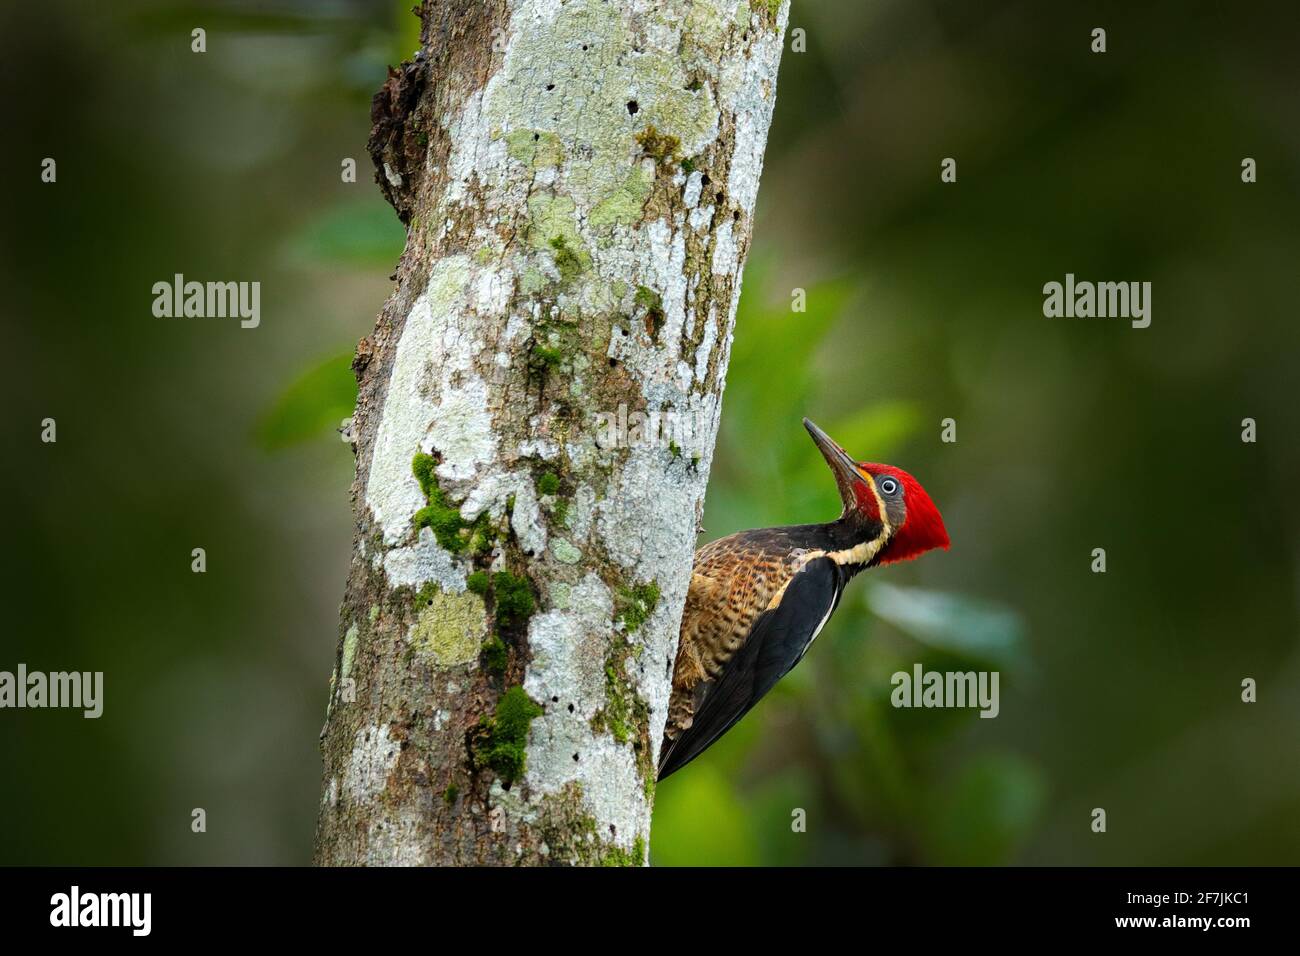 Lineated woodpecker, Dryocopus lineatus, sitting on branch with nesting hole, black and red bird in nature habitat, Costa Rica. Birdwatching, South Am Stock Photo